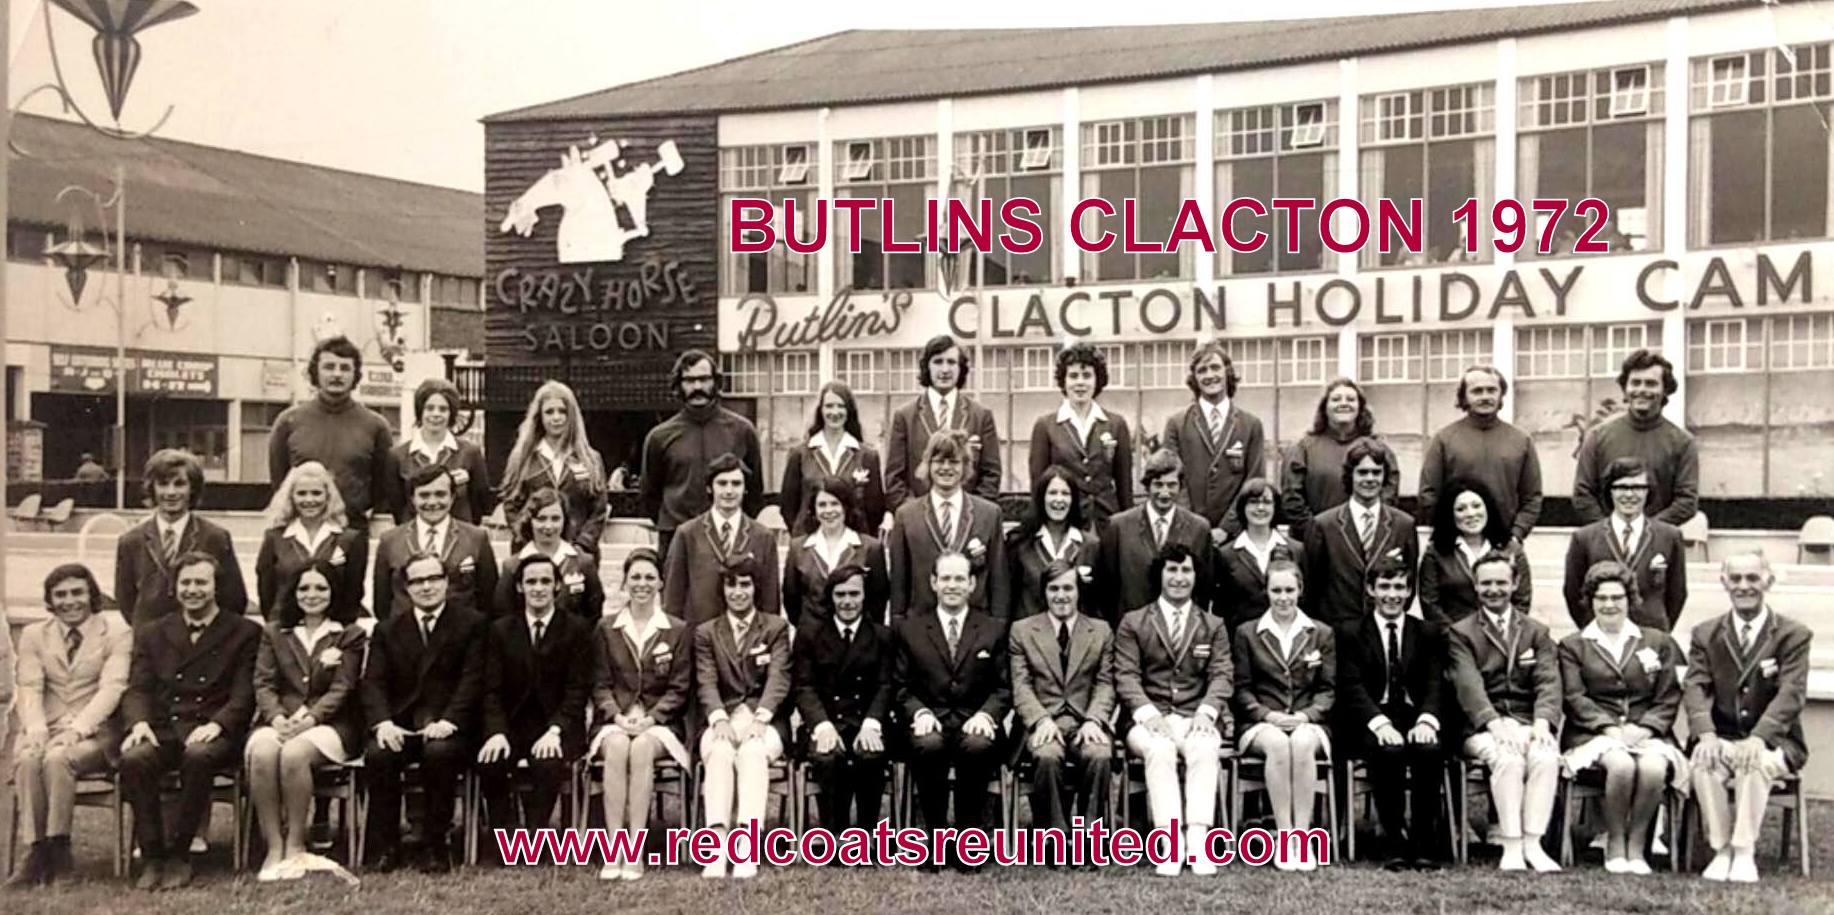 Butlins Clacton 1972 at Redcoats Reunited